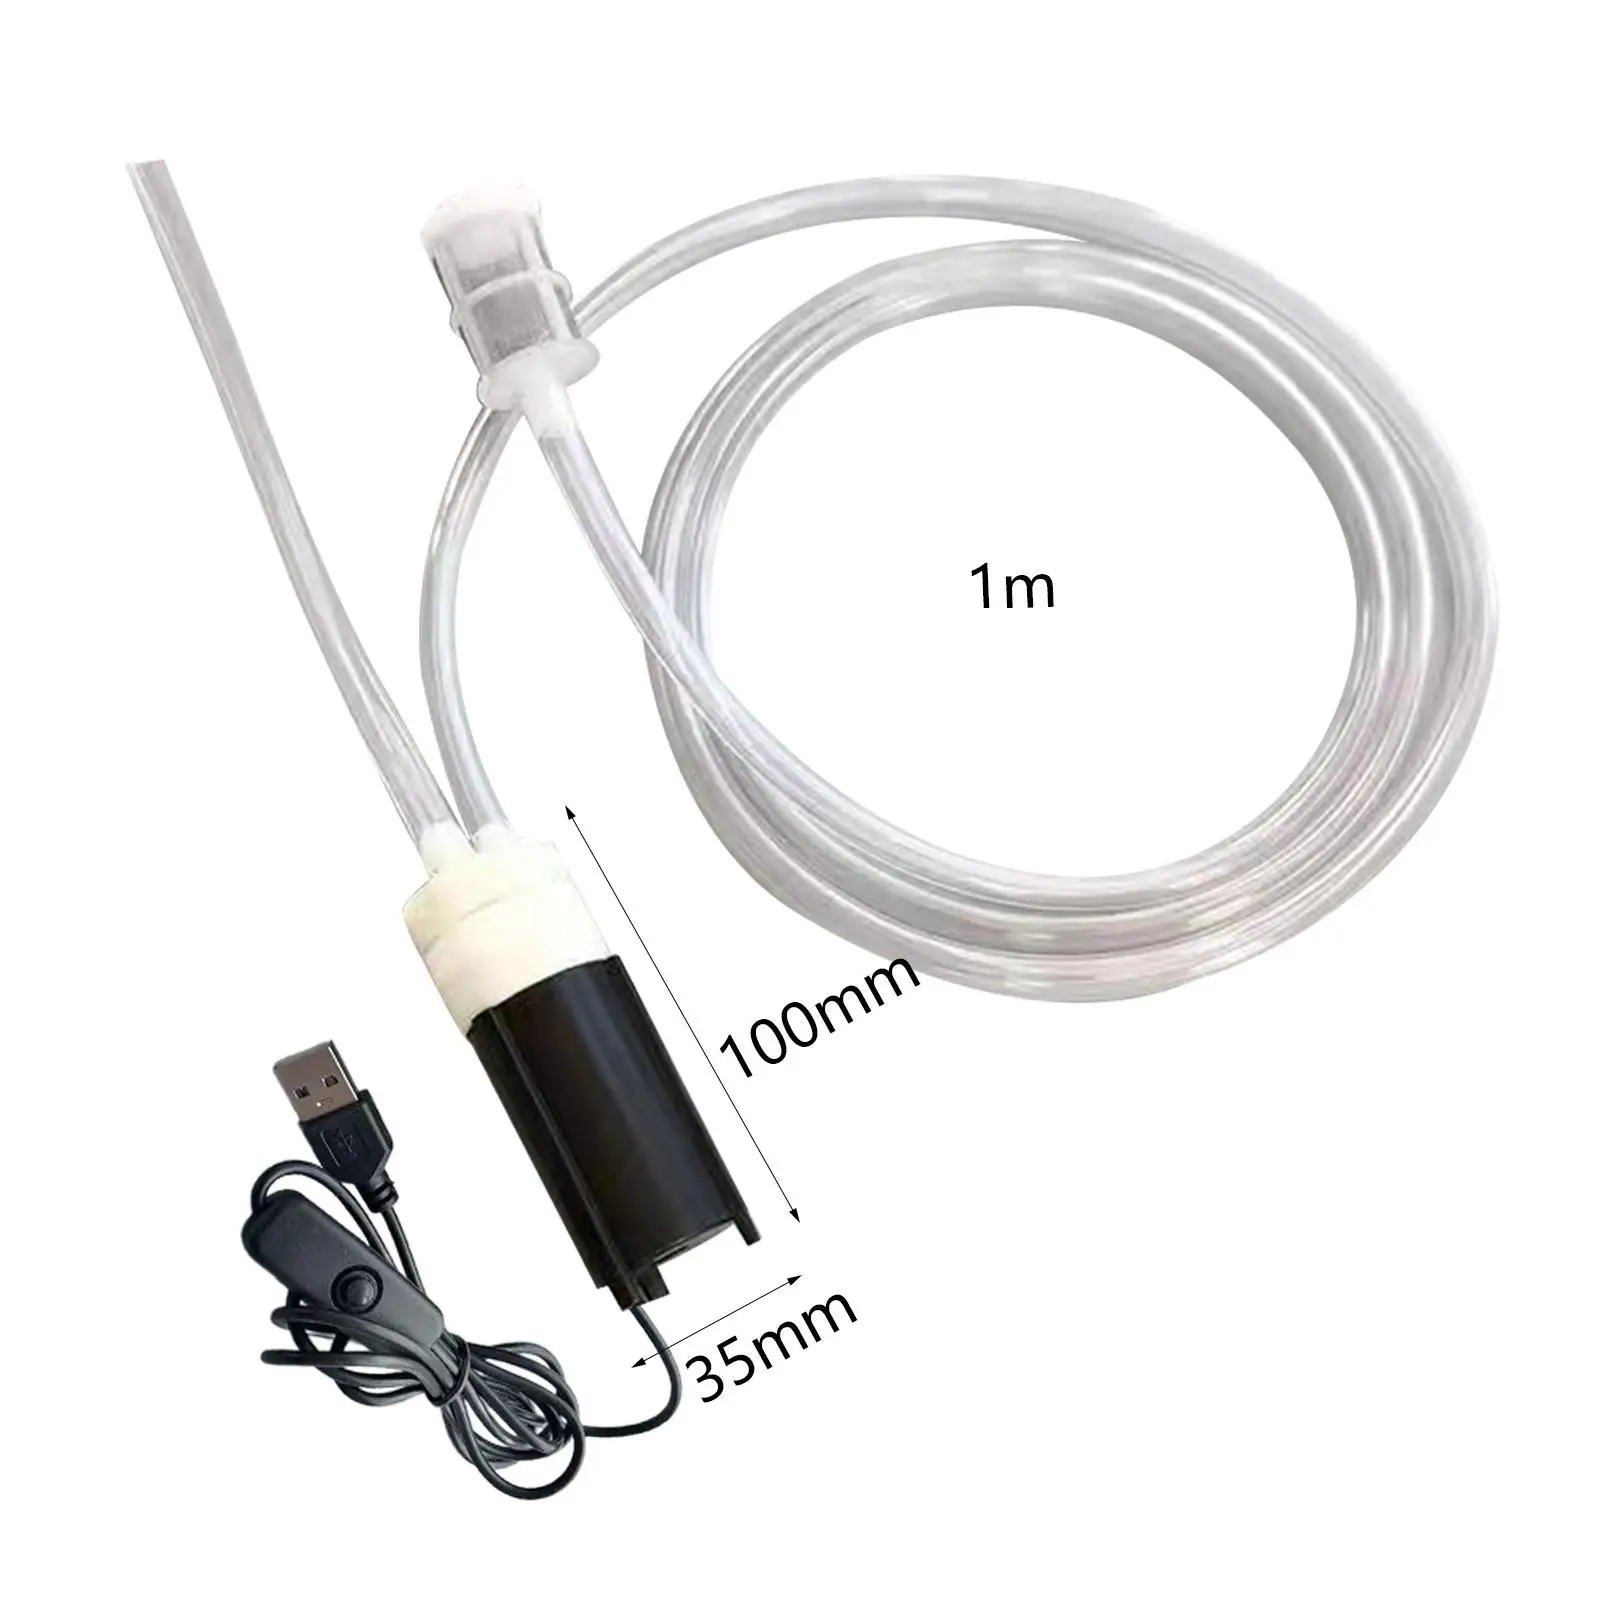 Portable Liquor Suction Device,Electric Wines Pump,Easy to Use Wines Making Supplies Powerful Soft Tube Brewings Siphon Pump